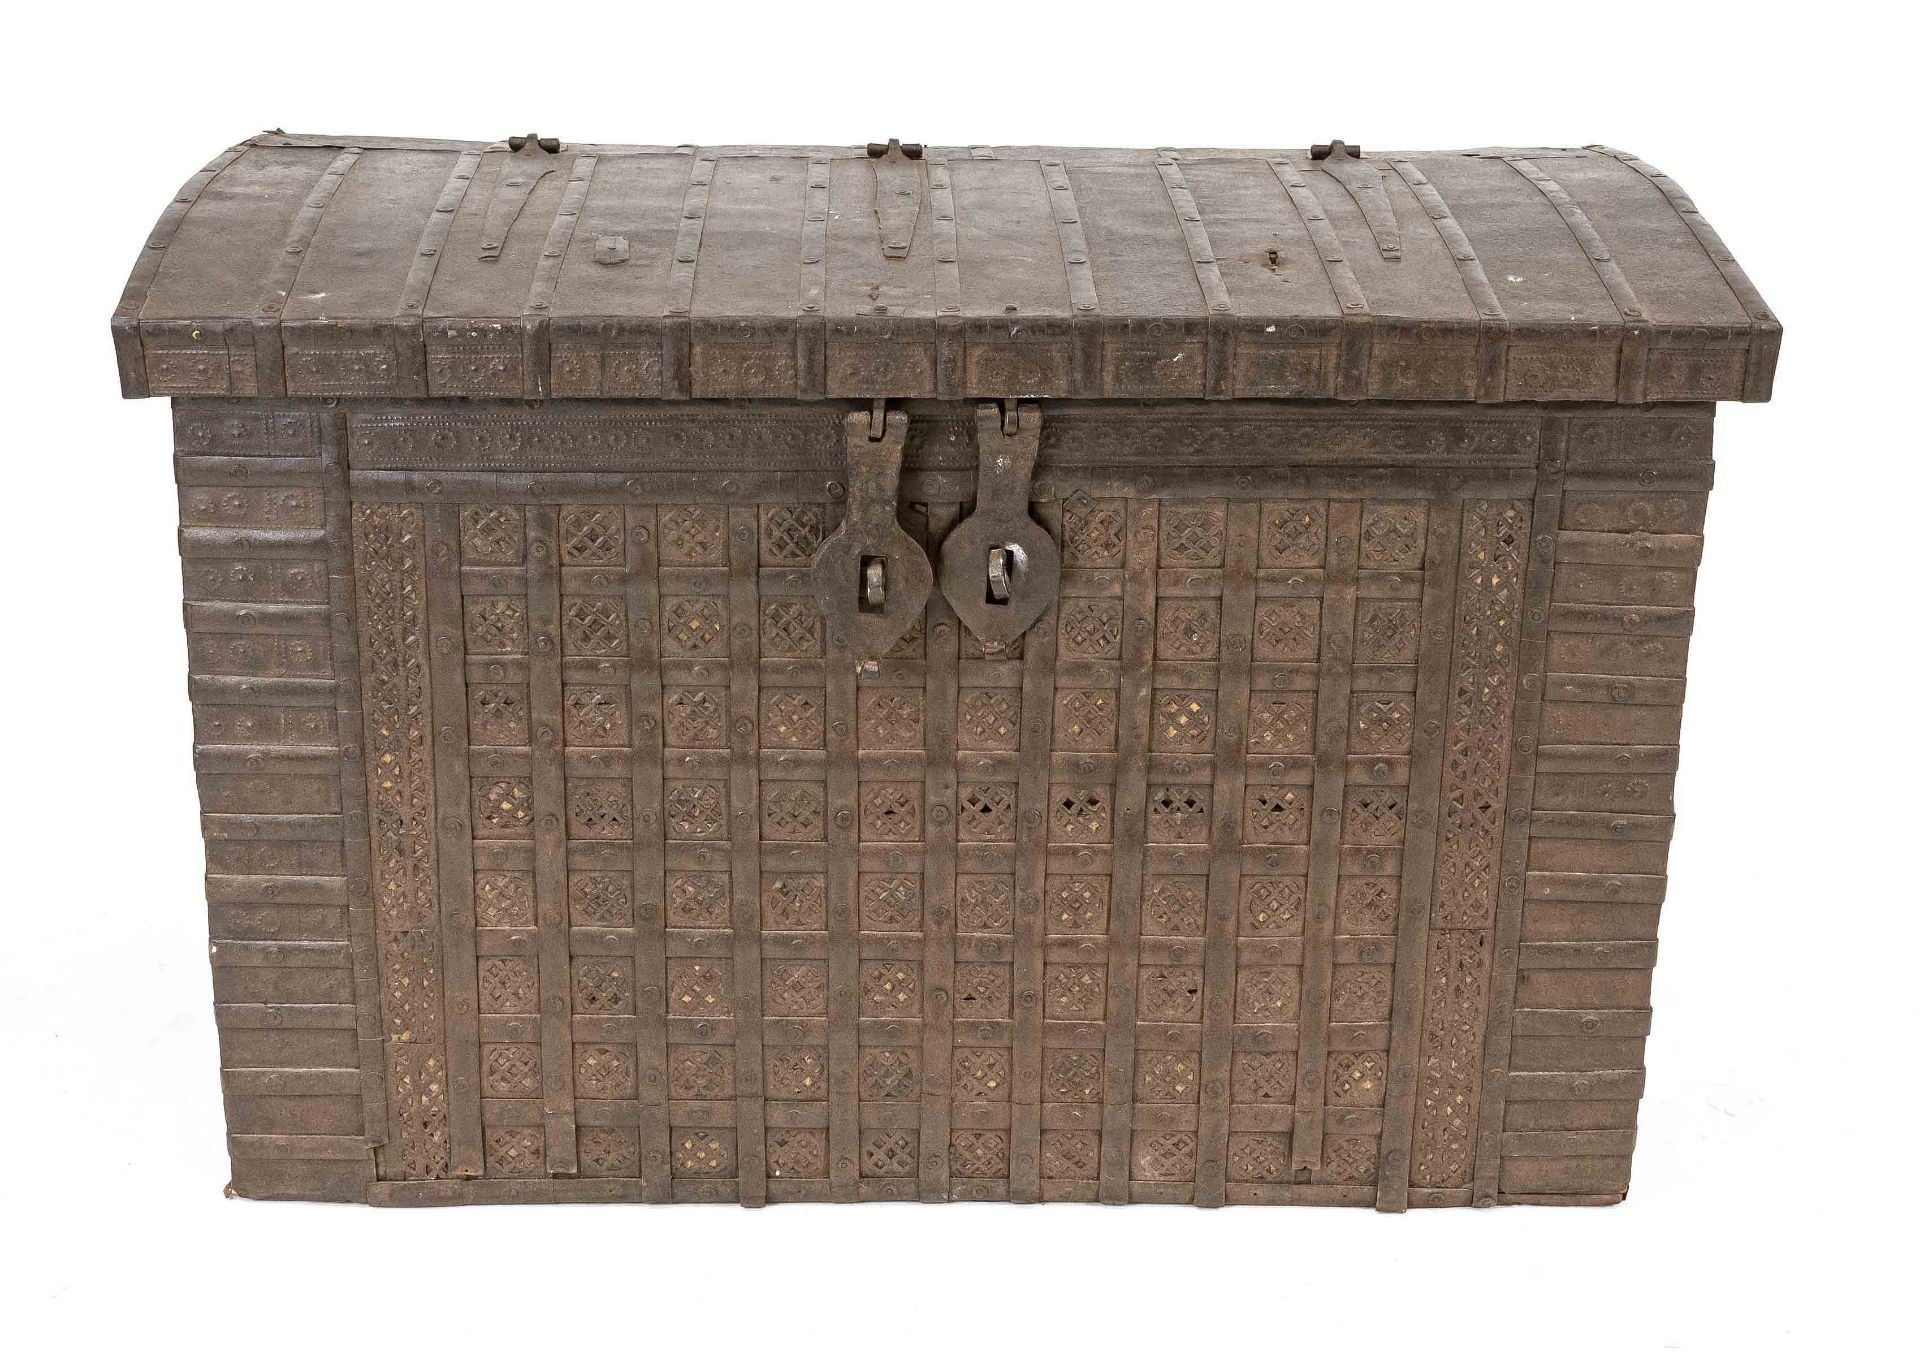 Large, probably oriental chest, 19th century or older, wooden body with sheet iron fittings, 76 x